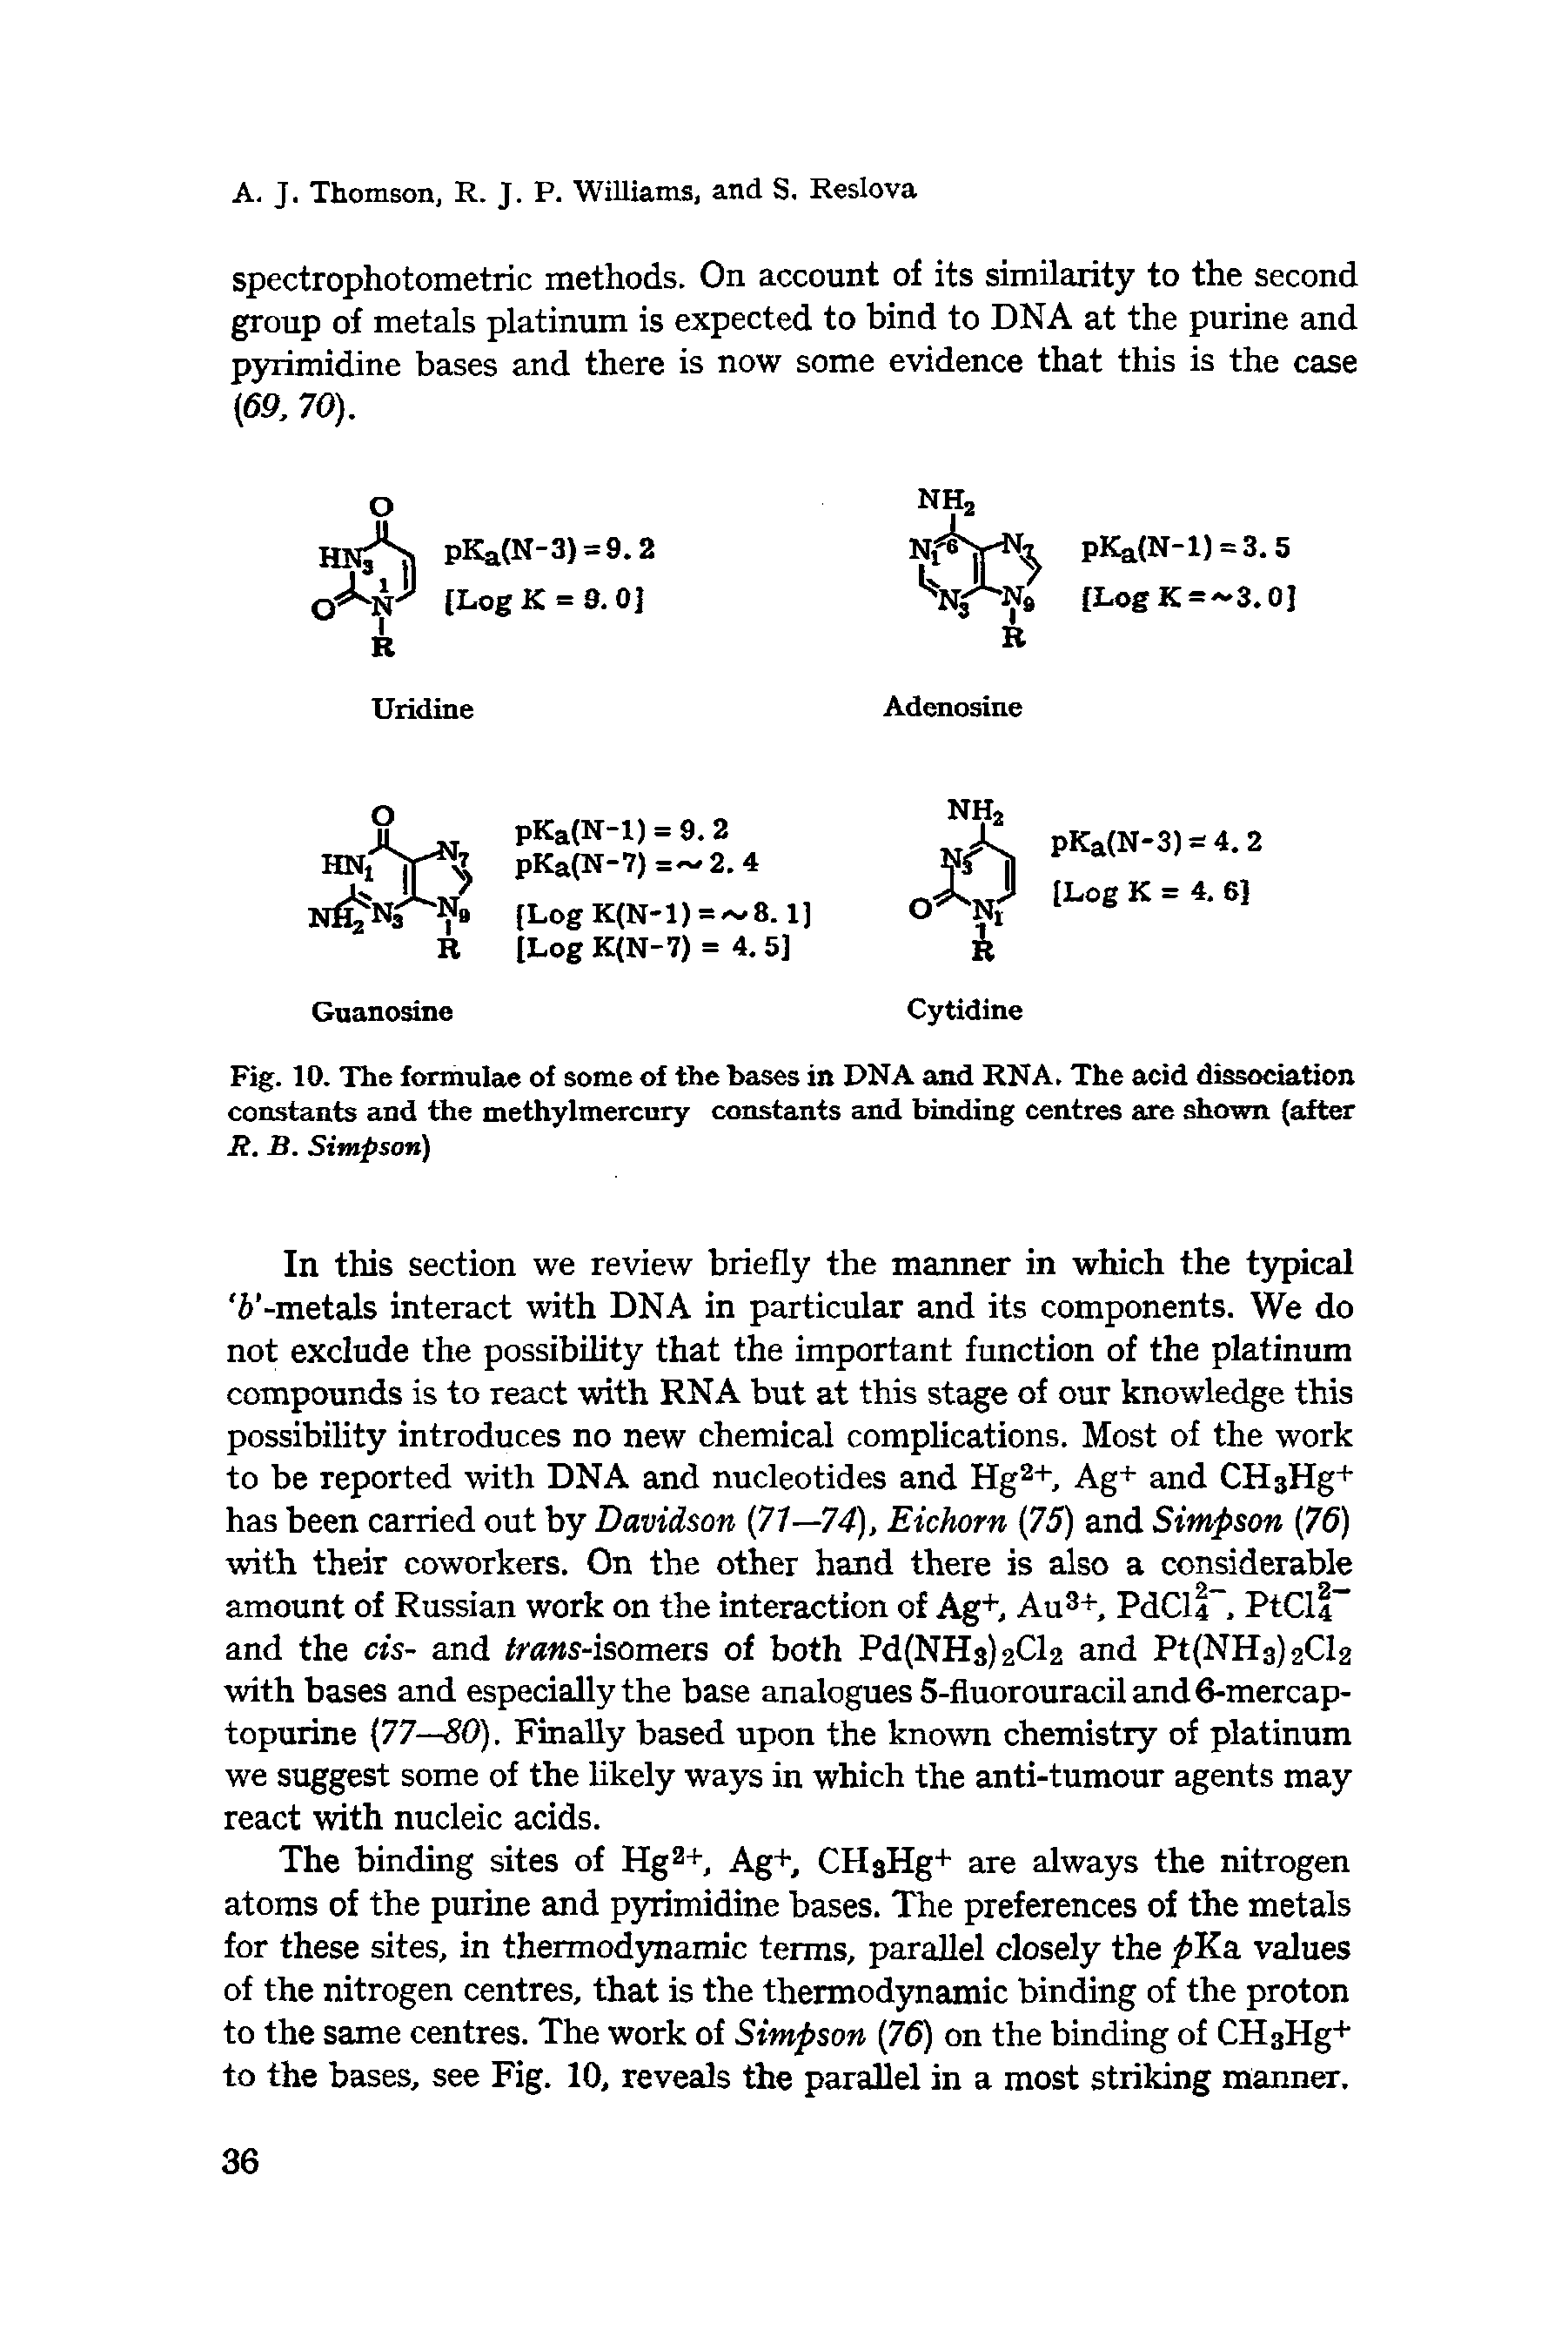 Fig. 10. The formulae of some of the bases in DNA and RNA. The acid dissociation constants and the methylmercury constants and binding centres axe shown (after R. B. Simpson)...